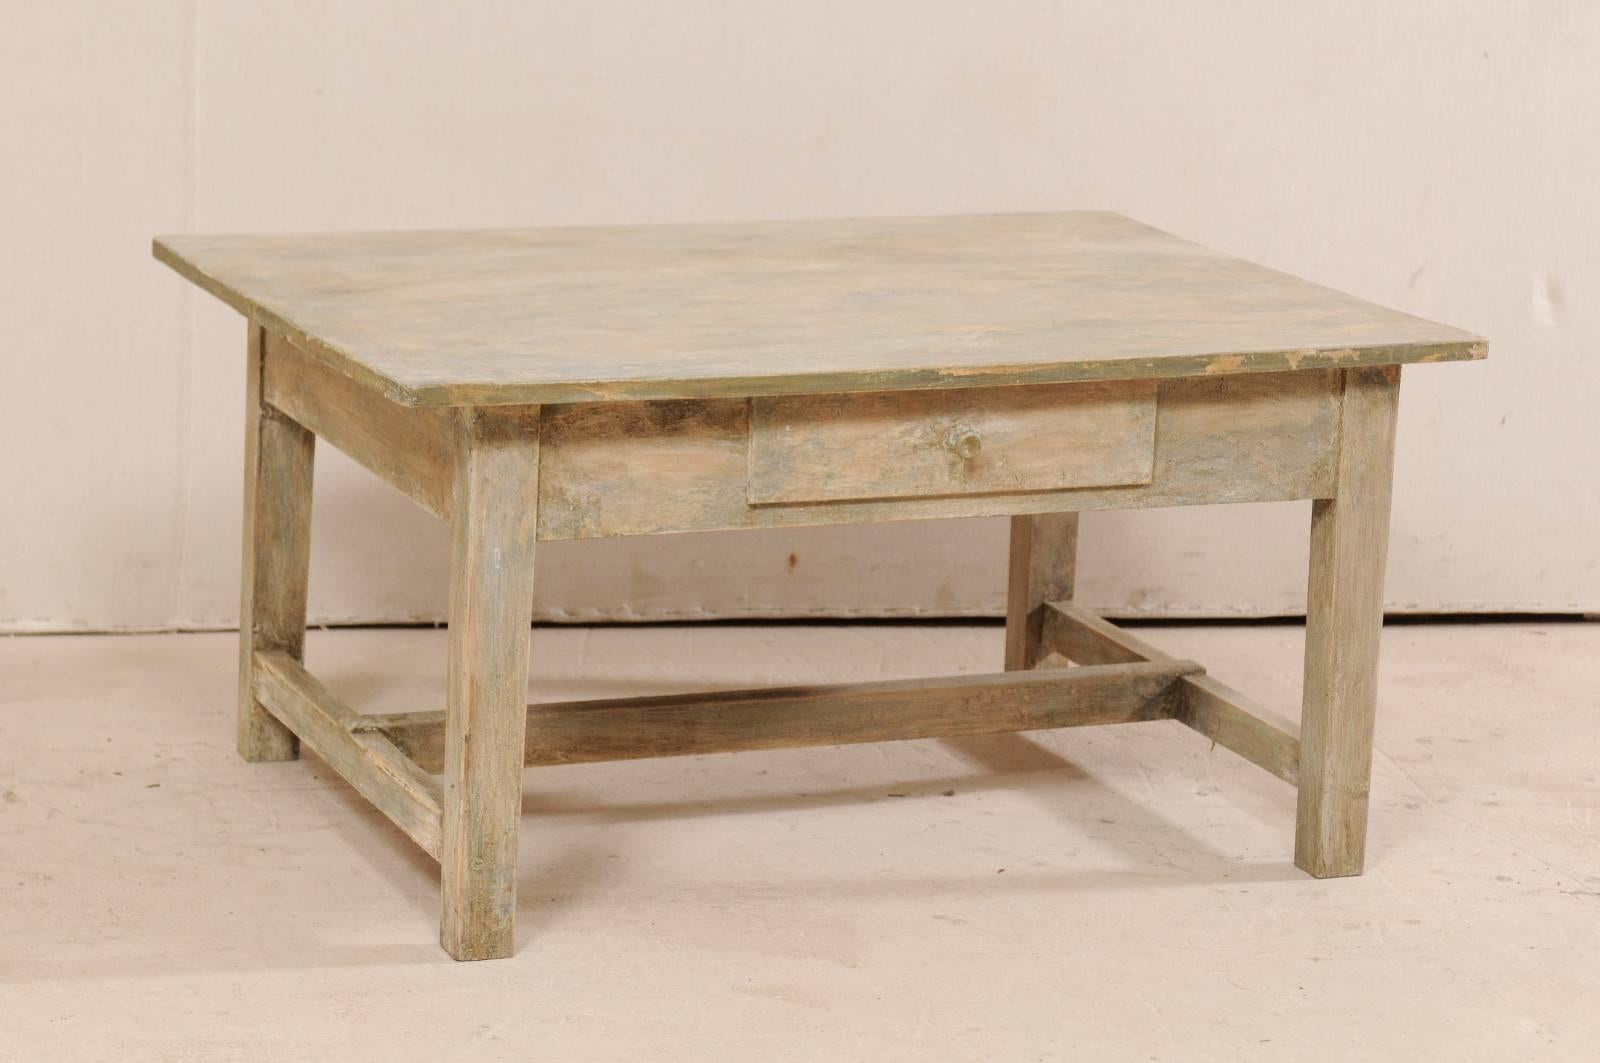 A Swedish mid-20th century painted wood coffee table. This mid-century table from Sweden features a rectangular-shape, overhanging top, straight skirt, and is raised up on squared legs. There is a single drawer set within the skirt at center, a